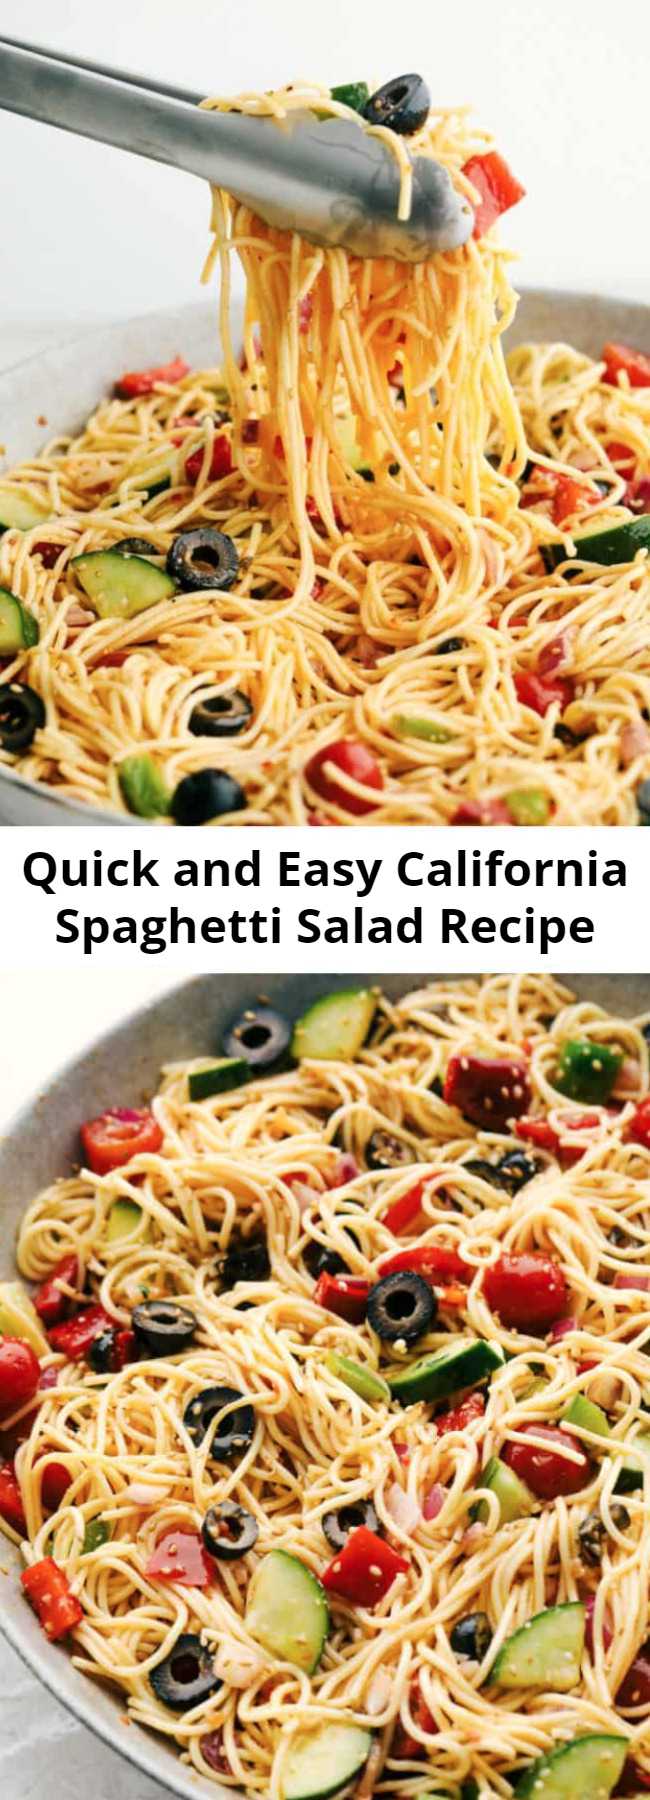 Quick and Easy California Spaghetti Salad Recipe - A delicious spaghetti salad filled with fresh summer veggies and olives. Topped with a zesty italian dressing and parmesan cheese, this will be the hit of your next gathering!